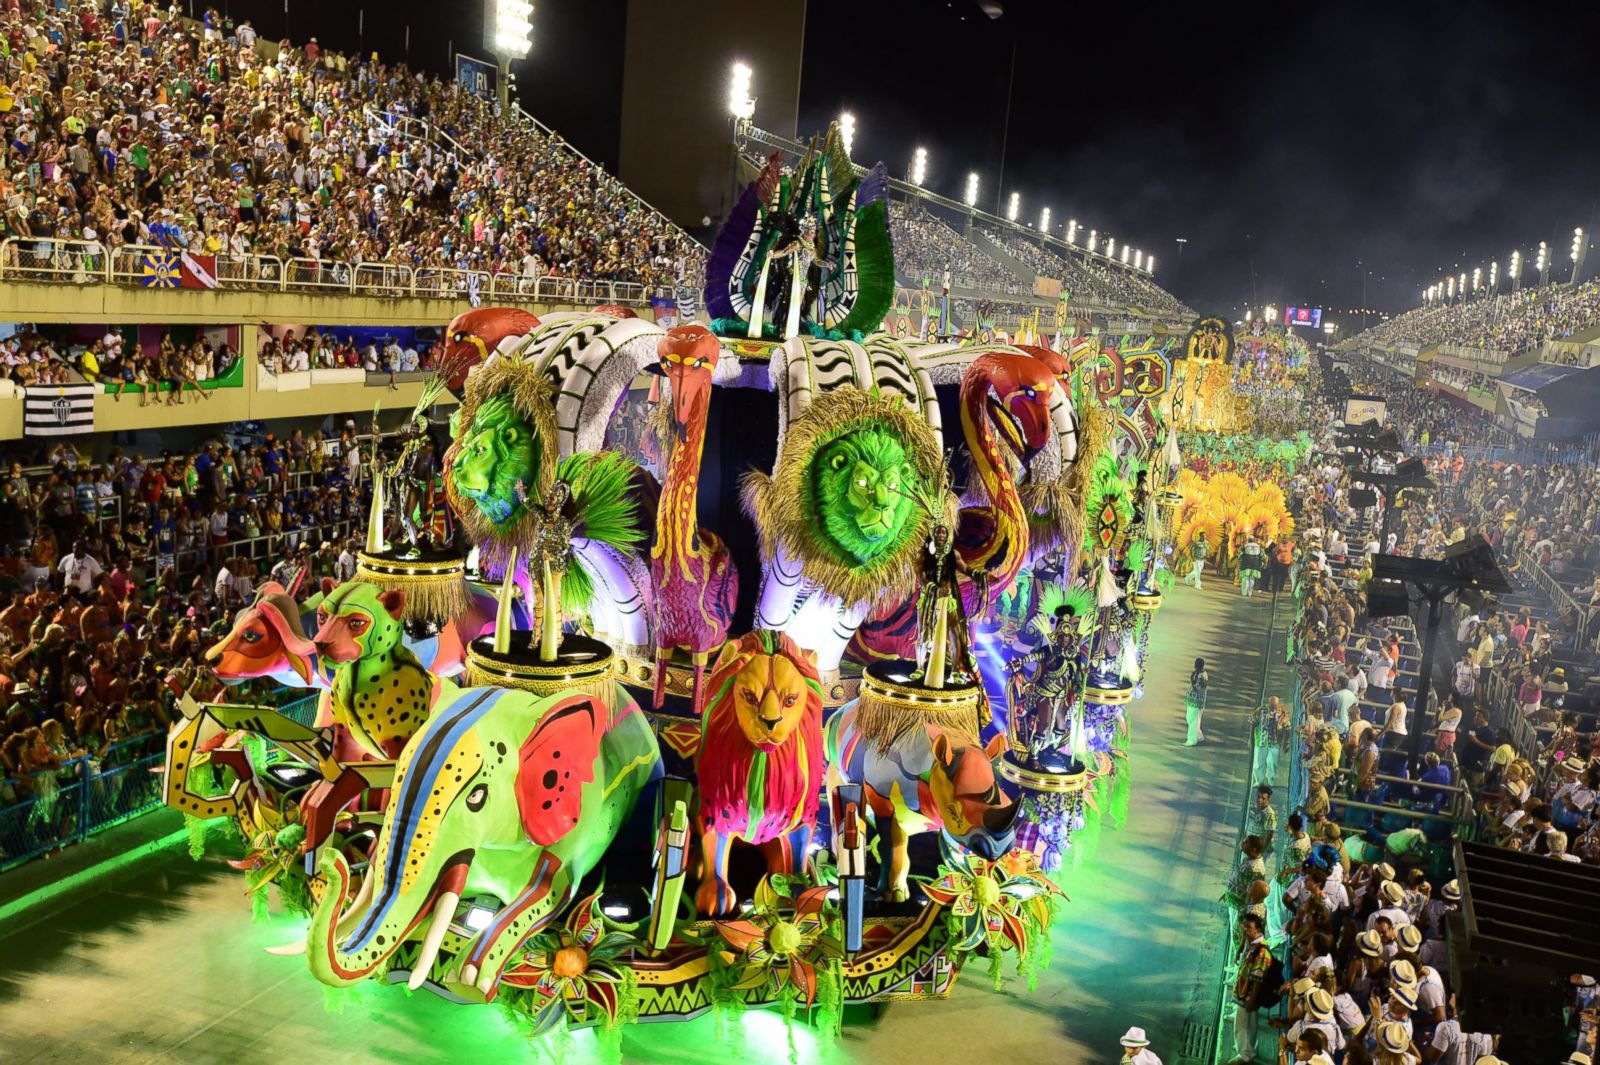 Best Images of Carnival in Brazil - ABC News